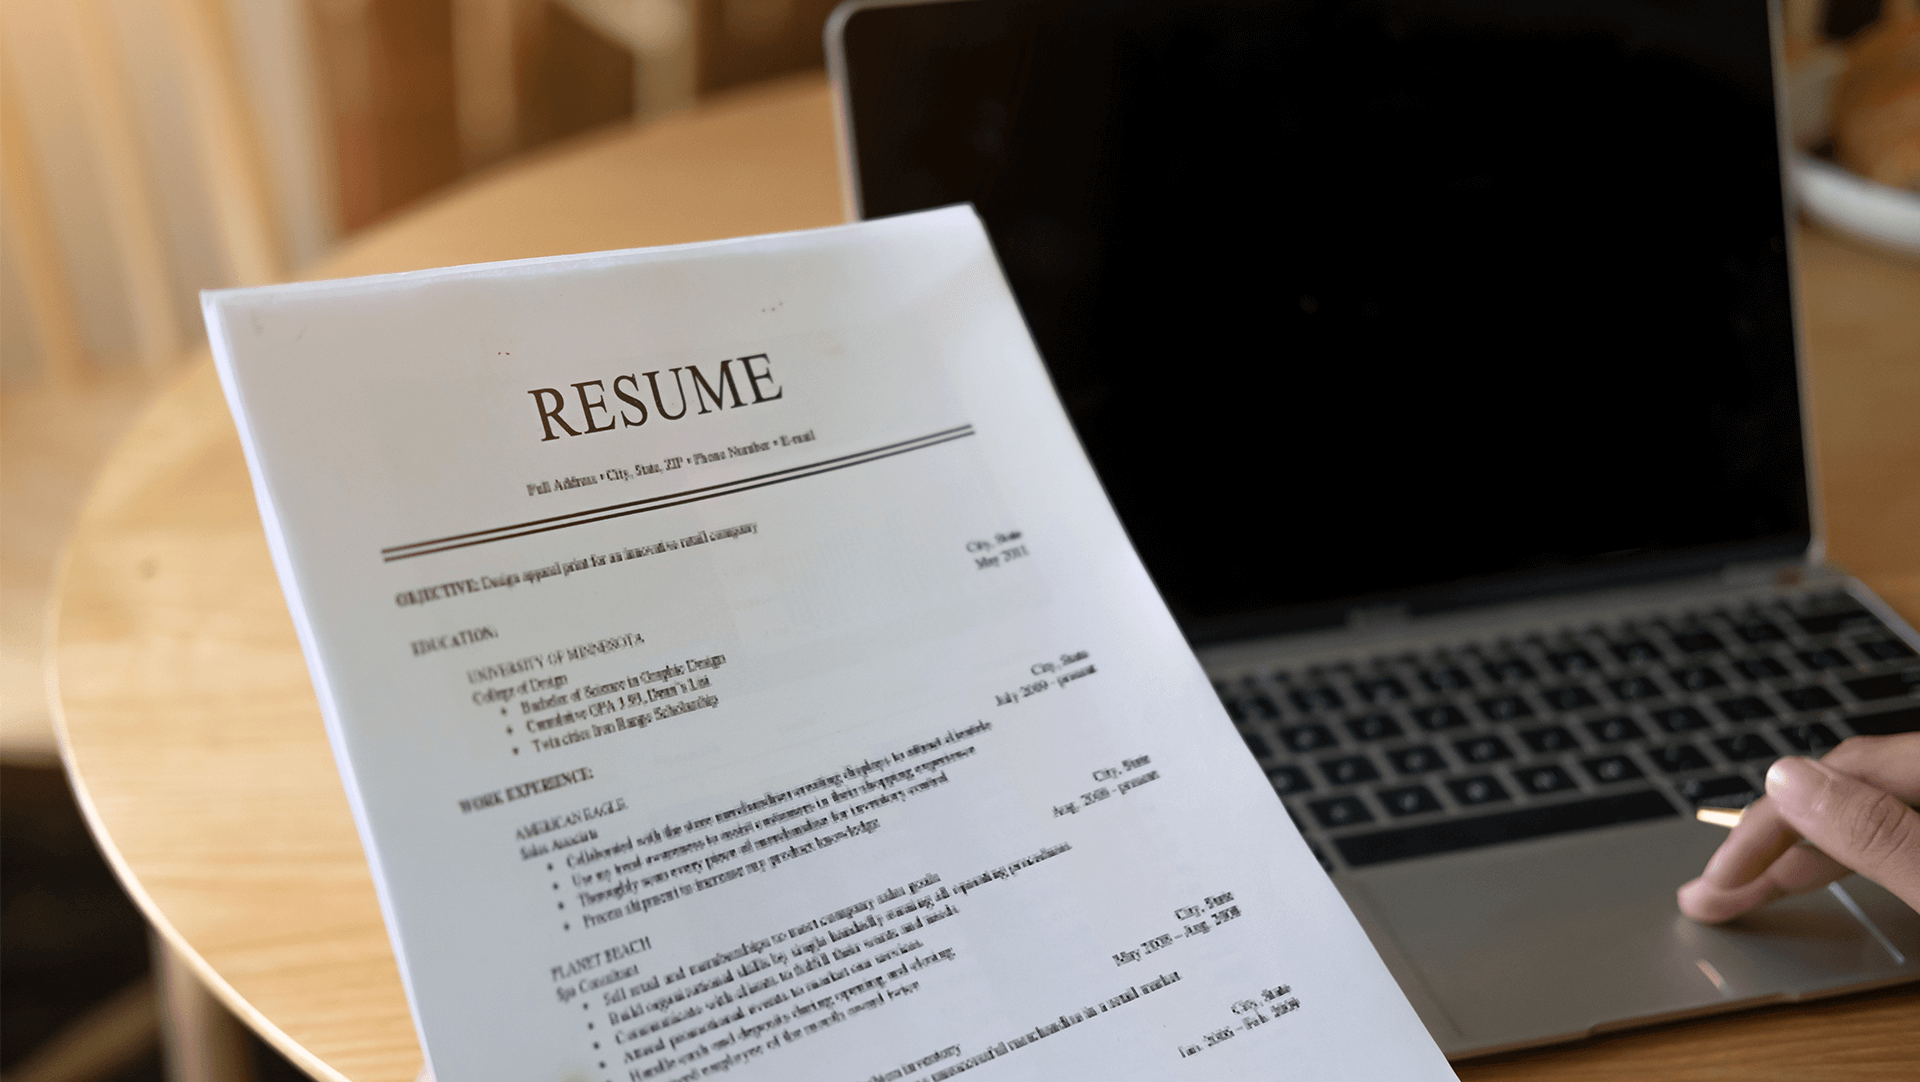 Using bullet points effectively in your resume